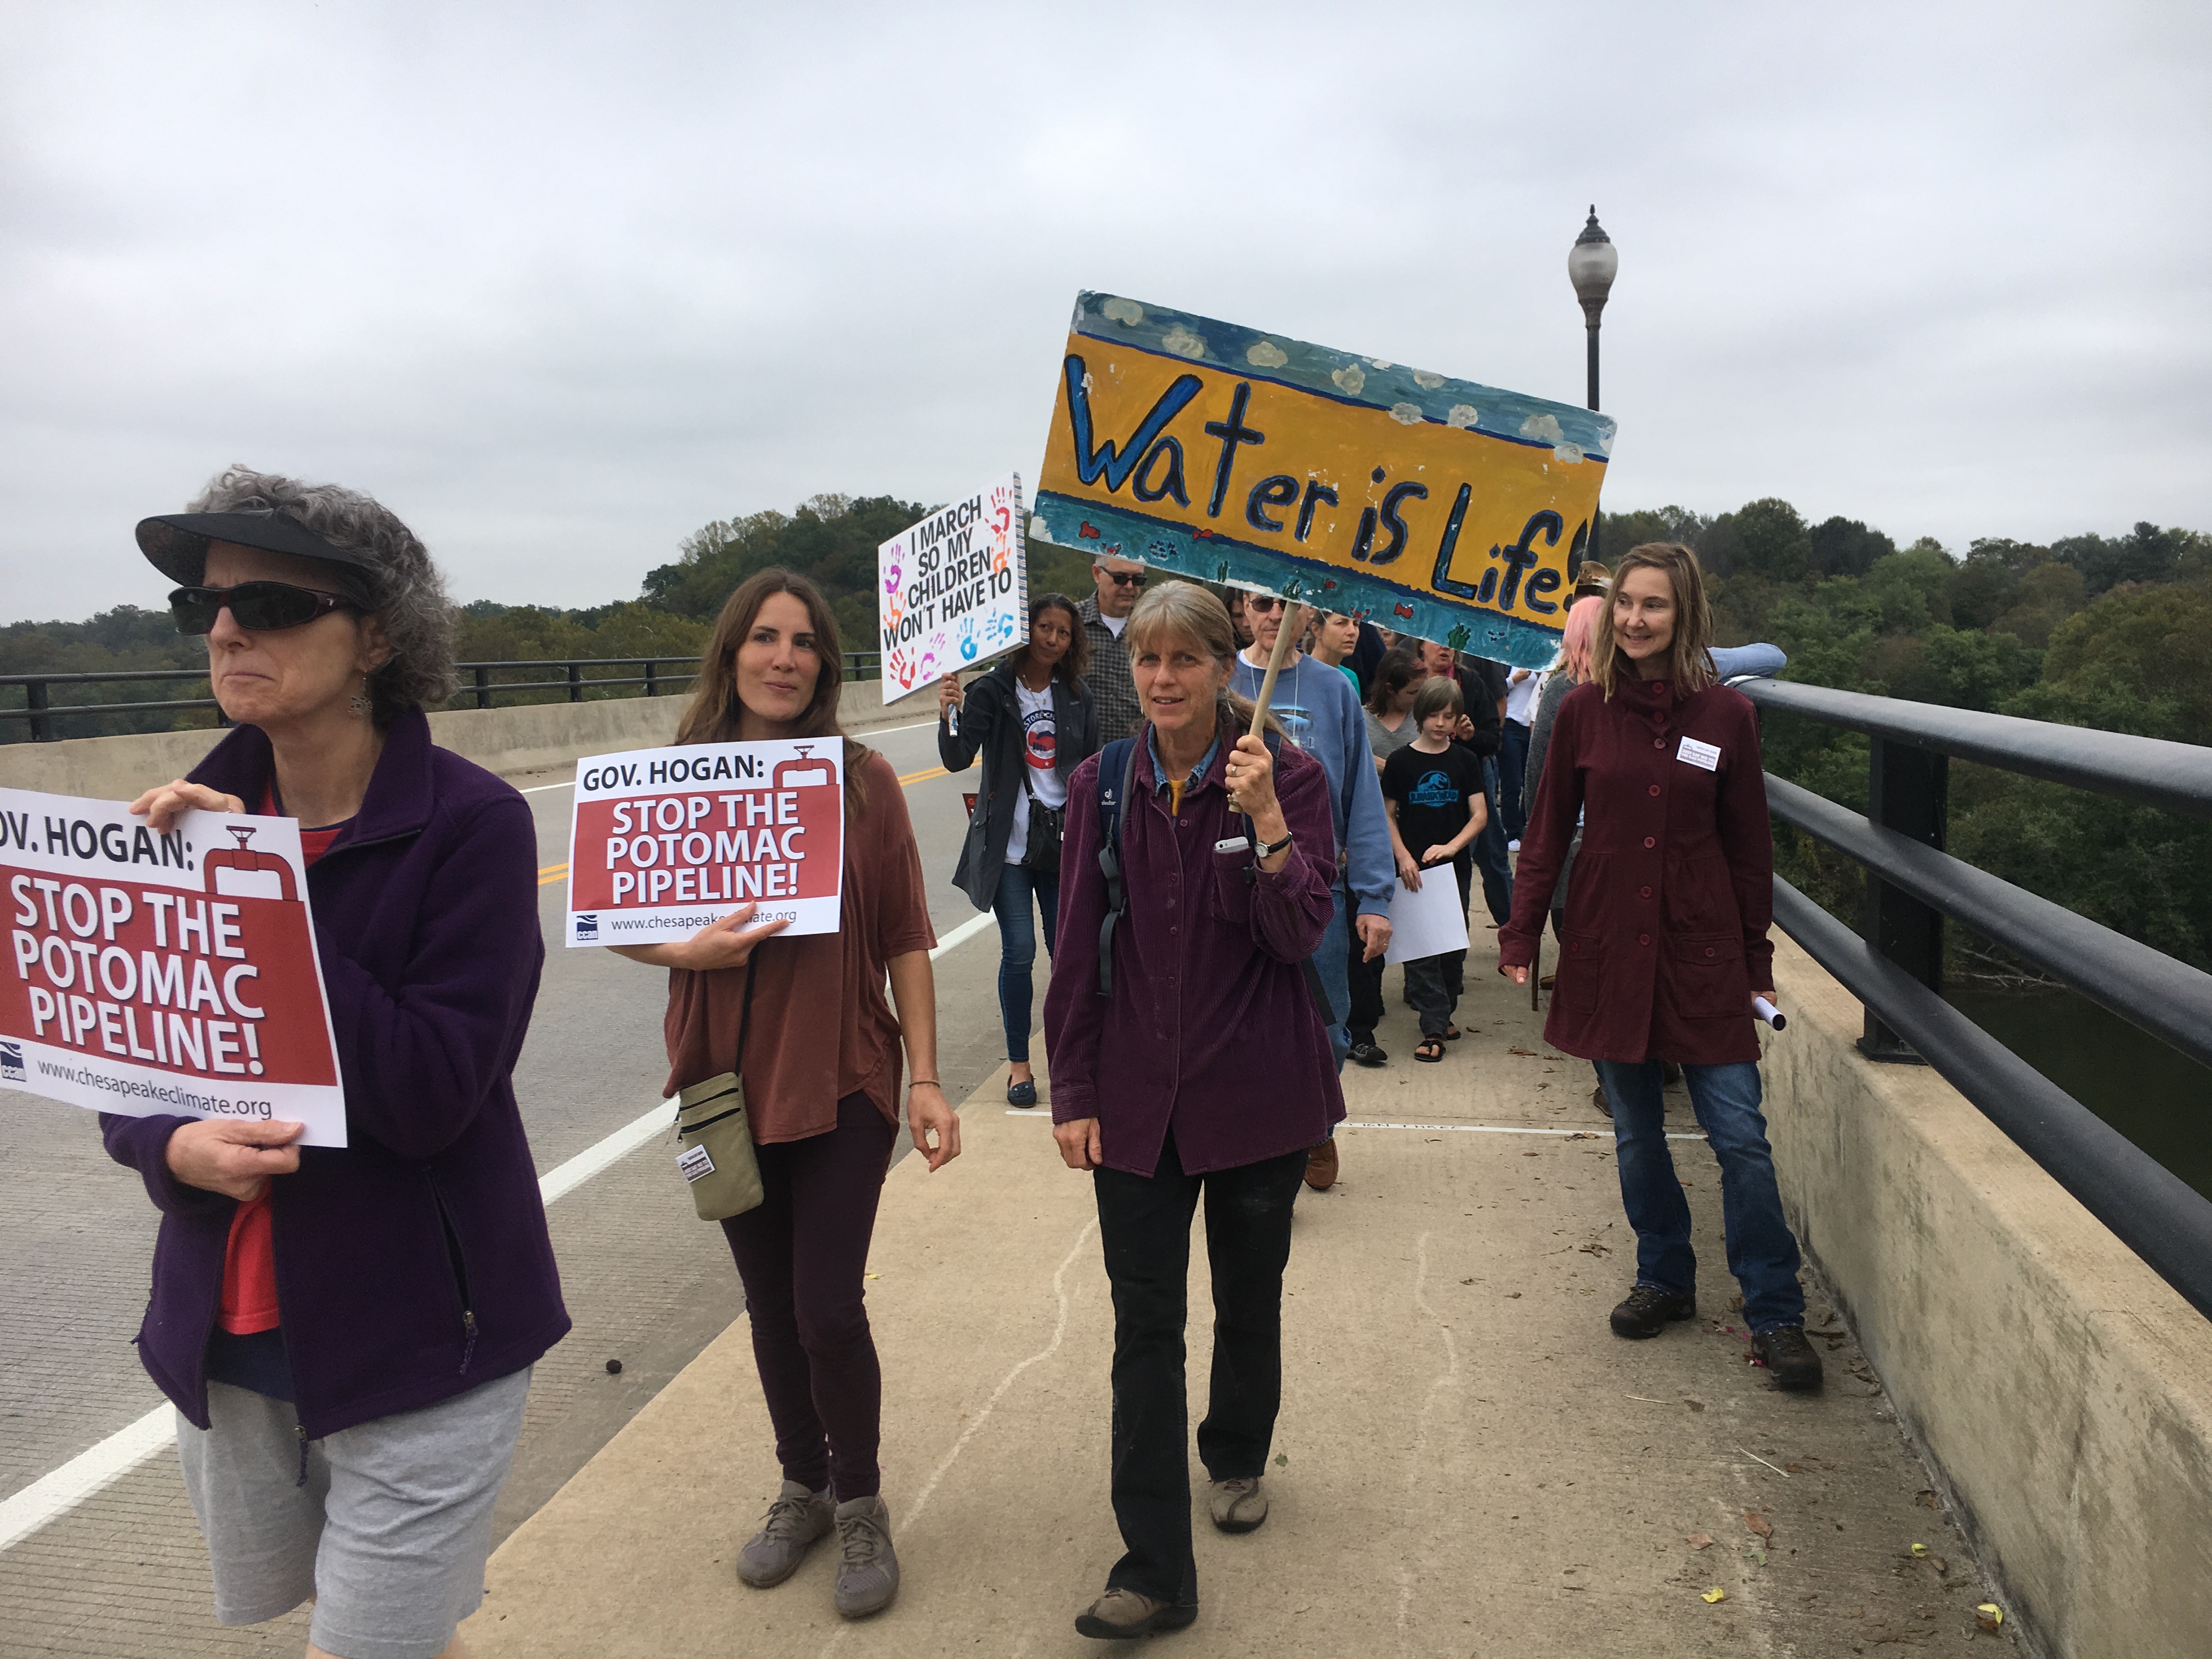 people marching against pipeline under Potomac